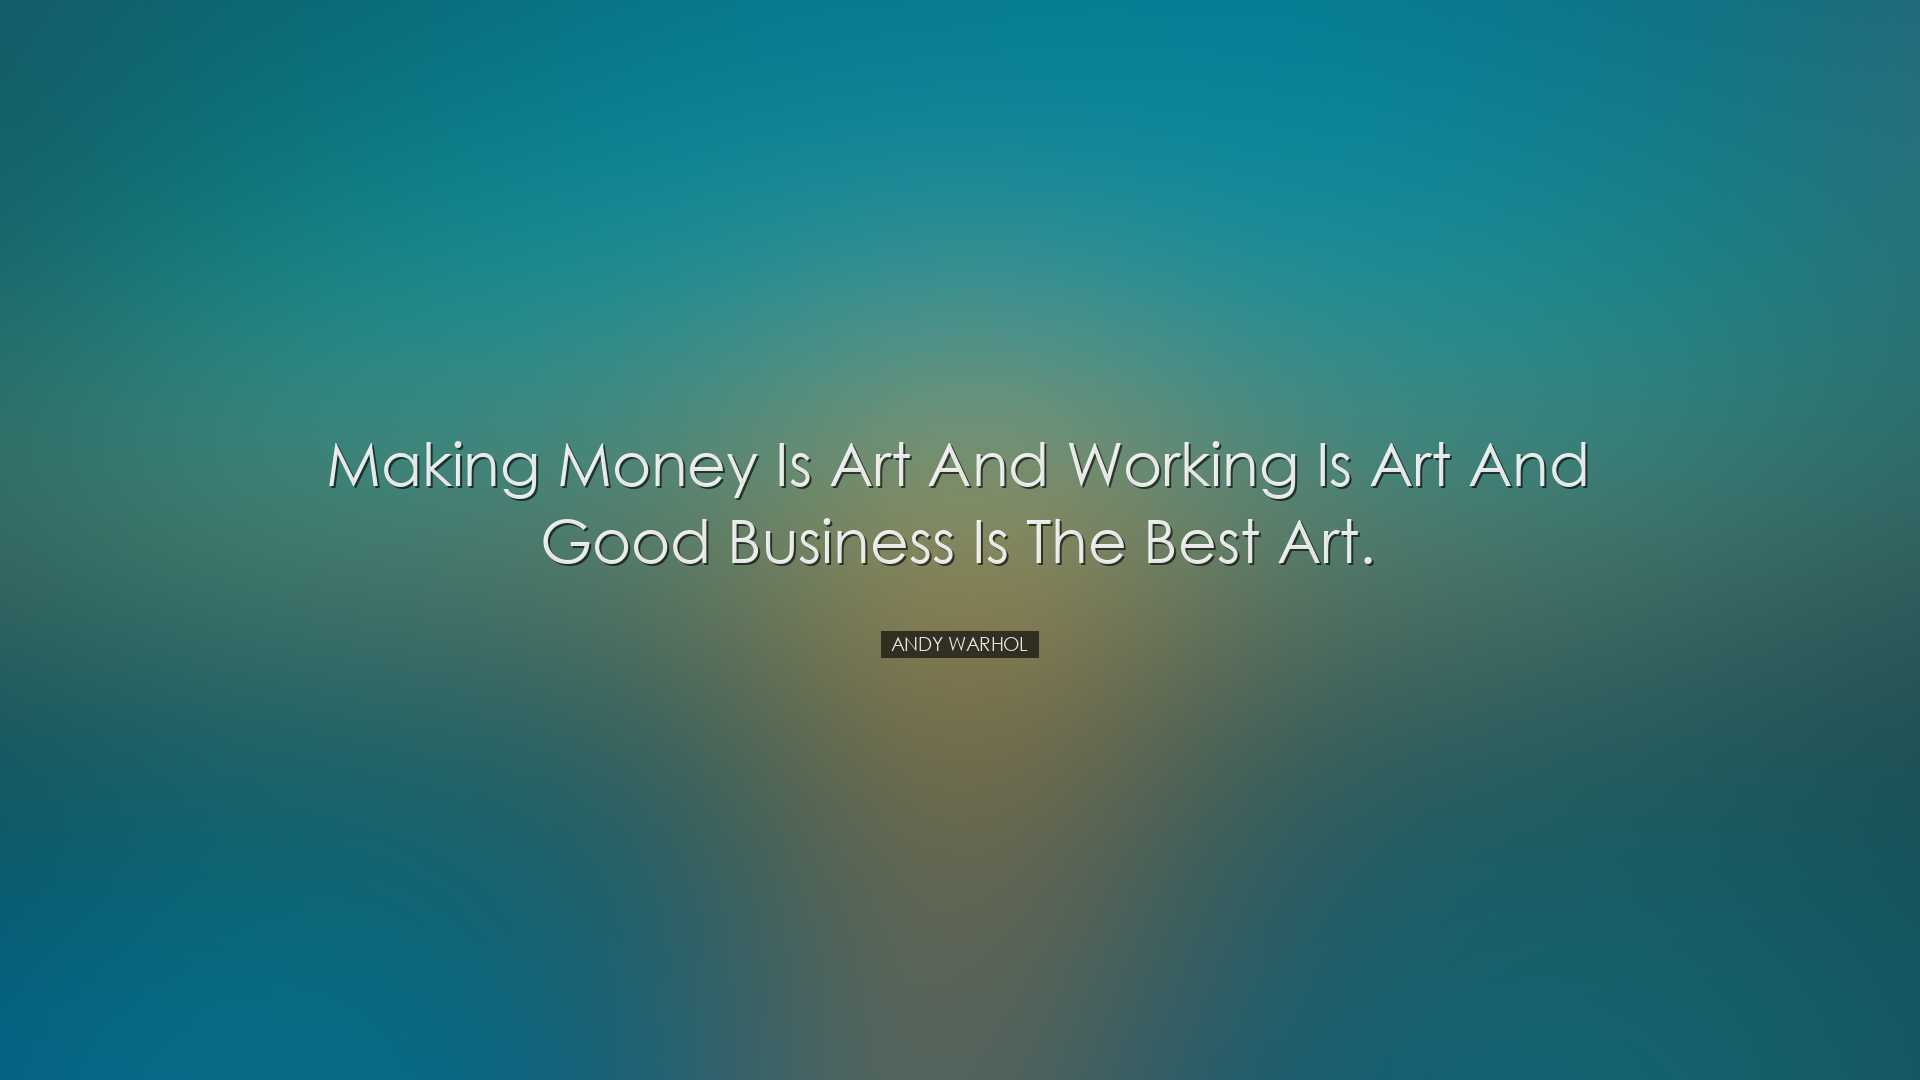 Making money is art and working is art and good business is the be